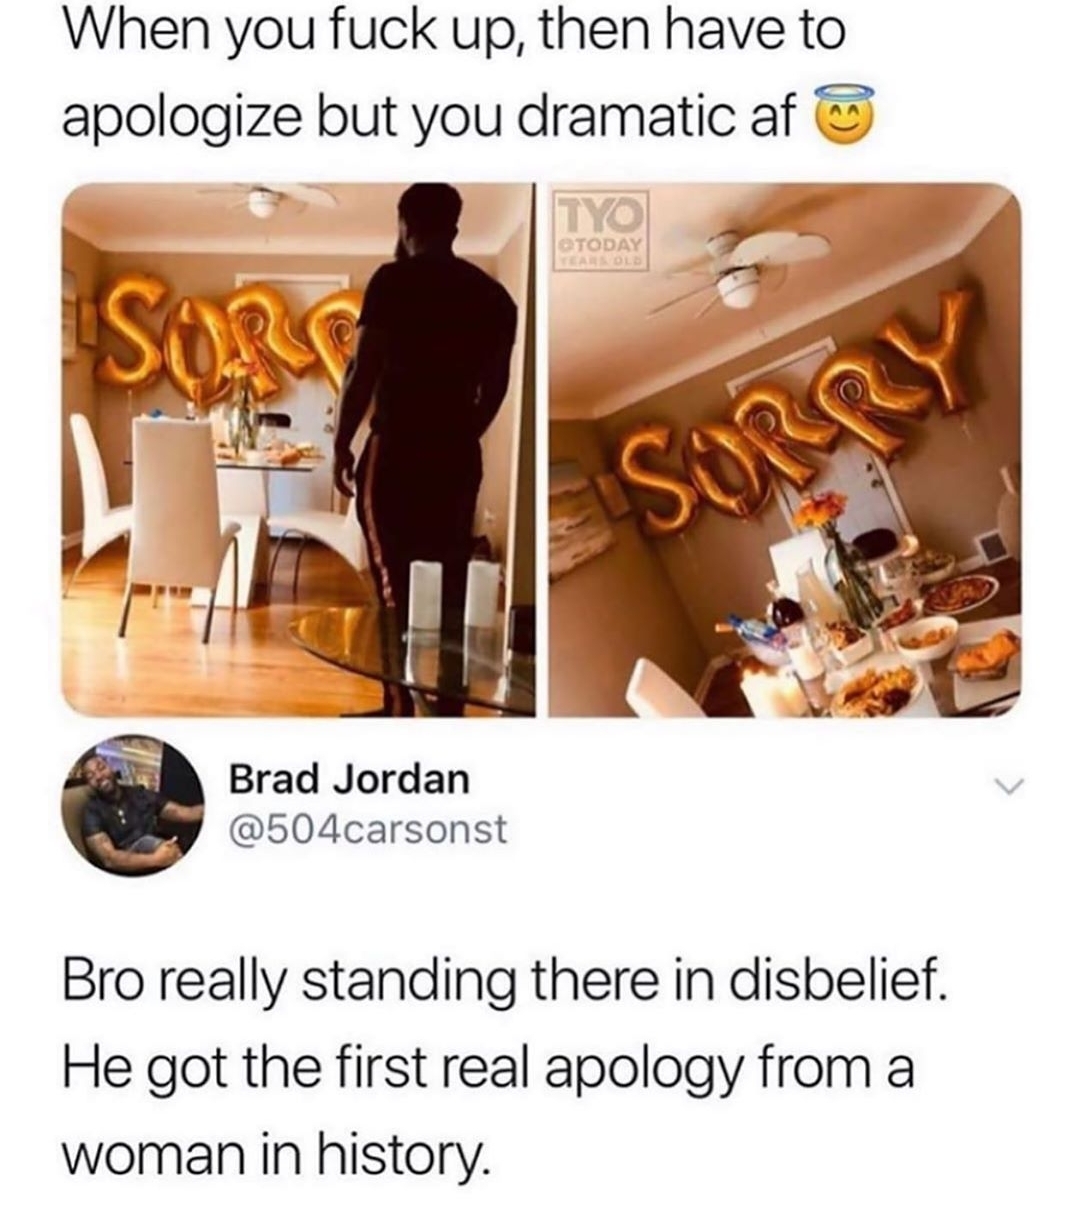 food - When you fuck up, then have to apologize but you dramatic af Sorg Brad Jordan Bro really standing there in disbelief. He got the first real apology from a woman in history.